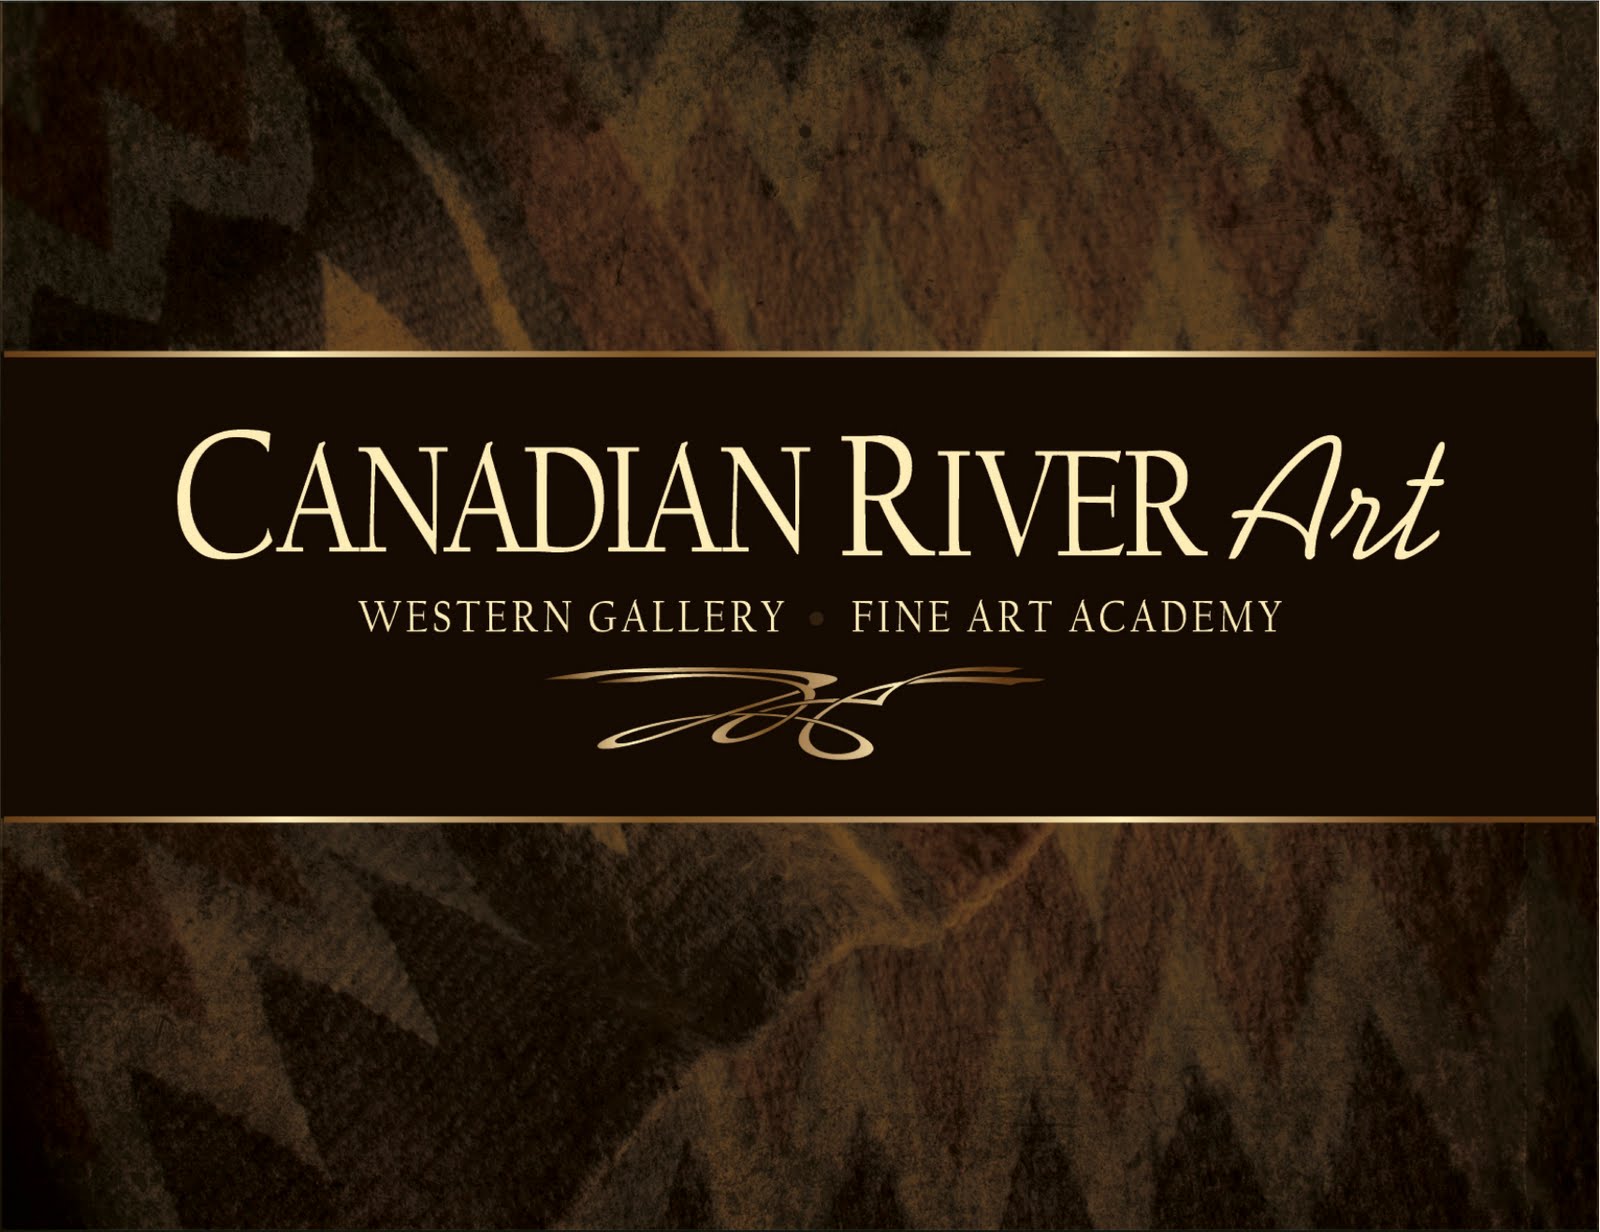 Canadian River Art Gallery